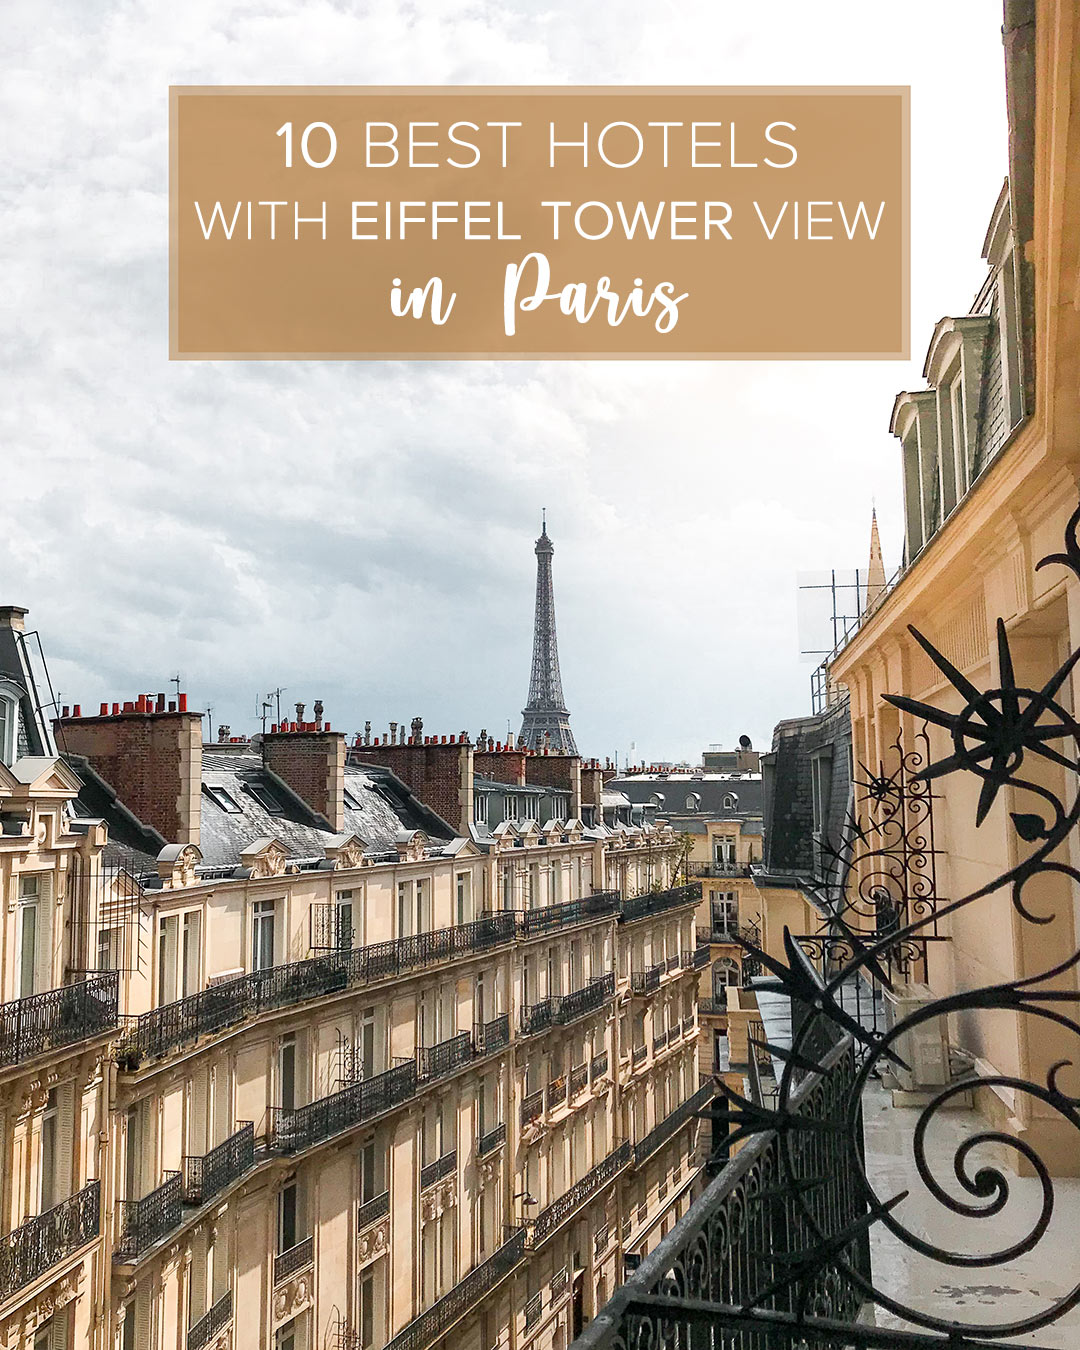 10 Best Hotels With Eiffel Tower View In Paris